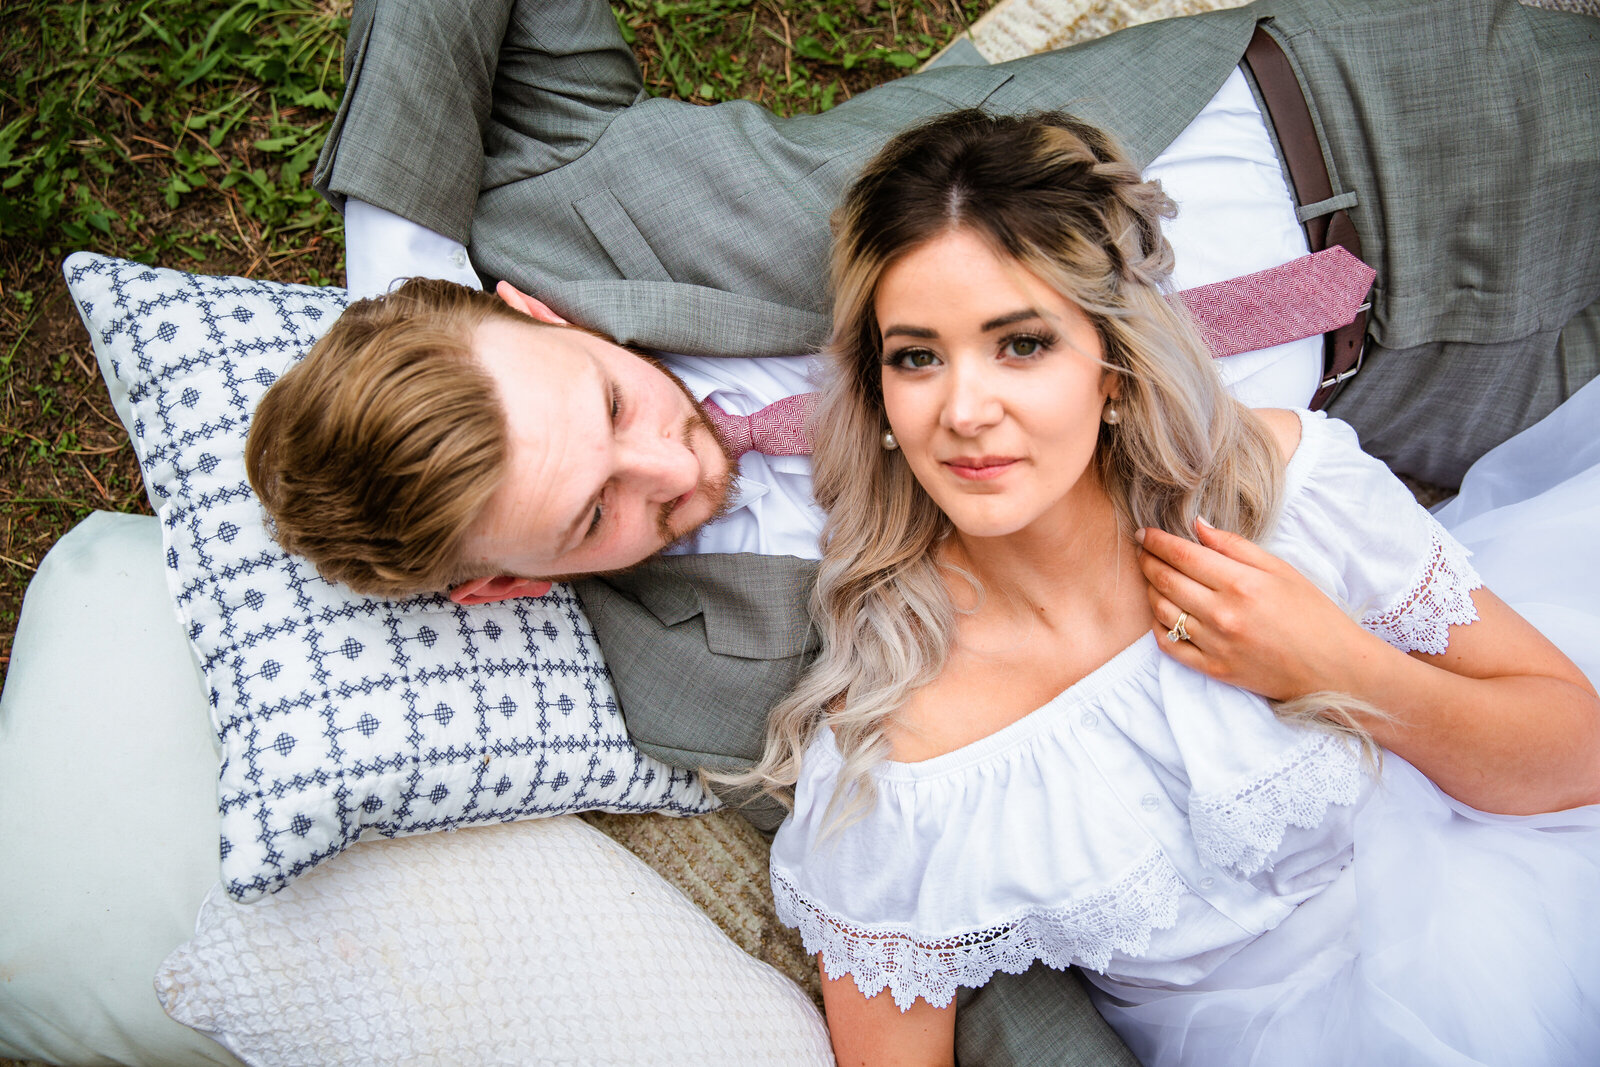 Jackson Hole photographers capture couple laying together on blanket after outdoor elopement